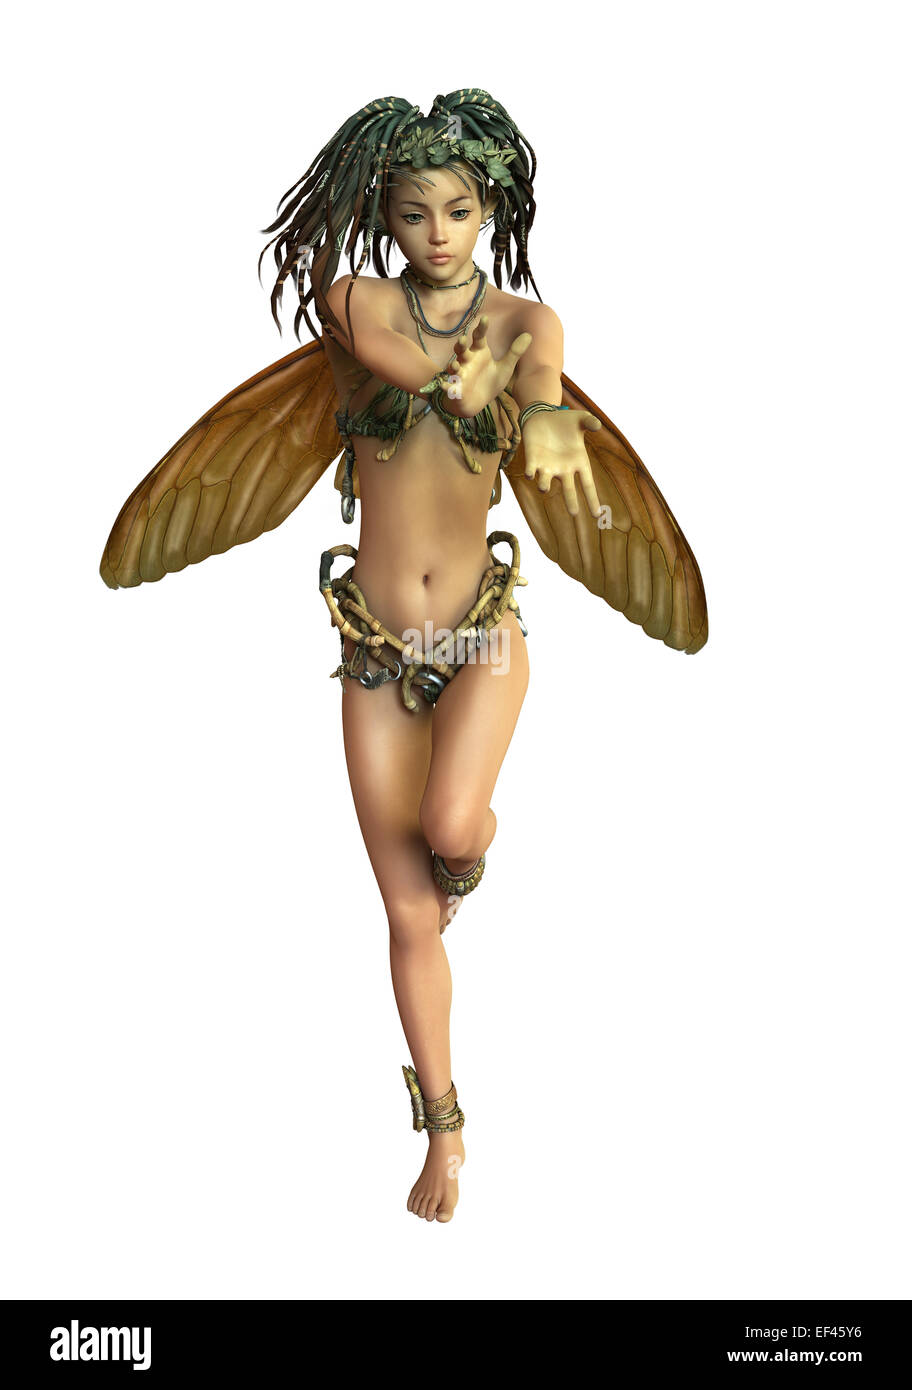 3d computer graphics of a fairy with braided hair and butterfly wings Stock Photo